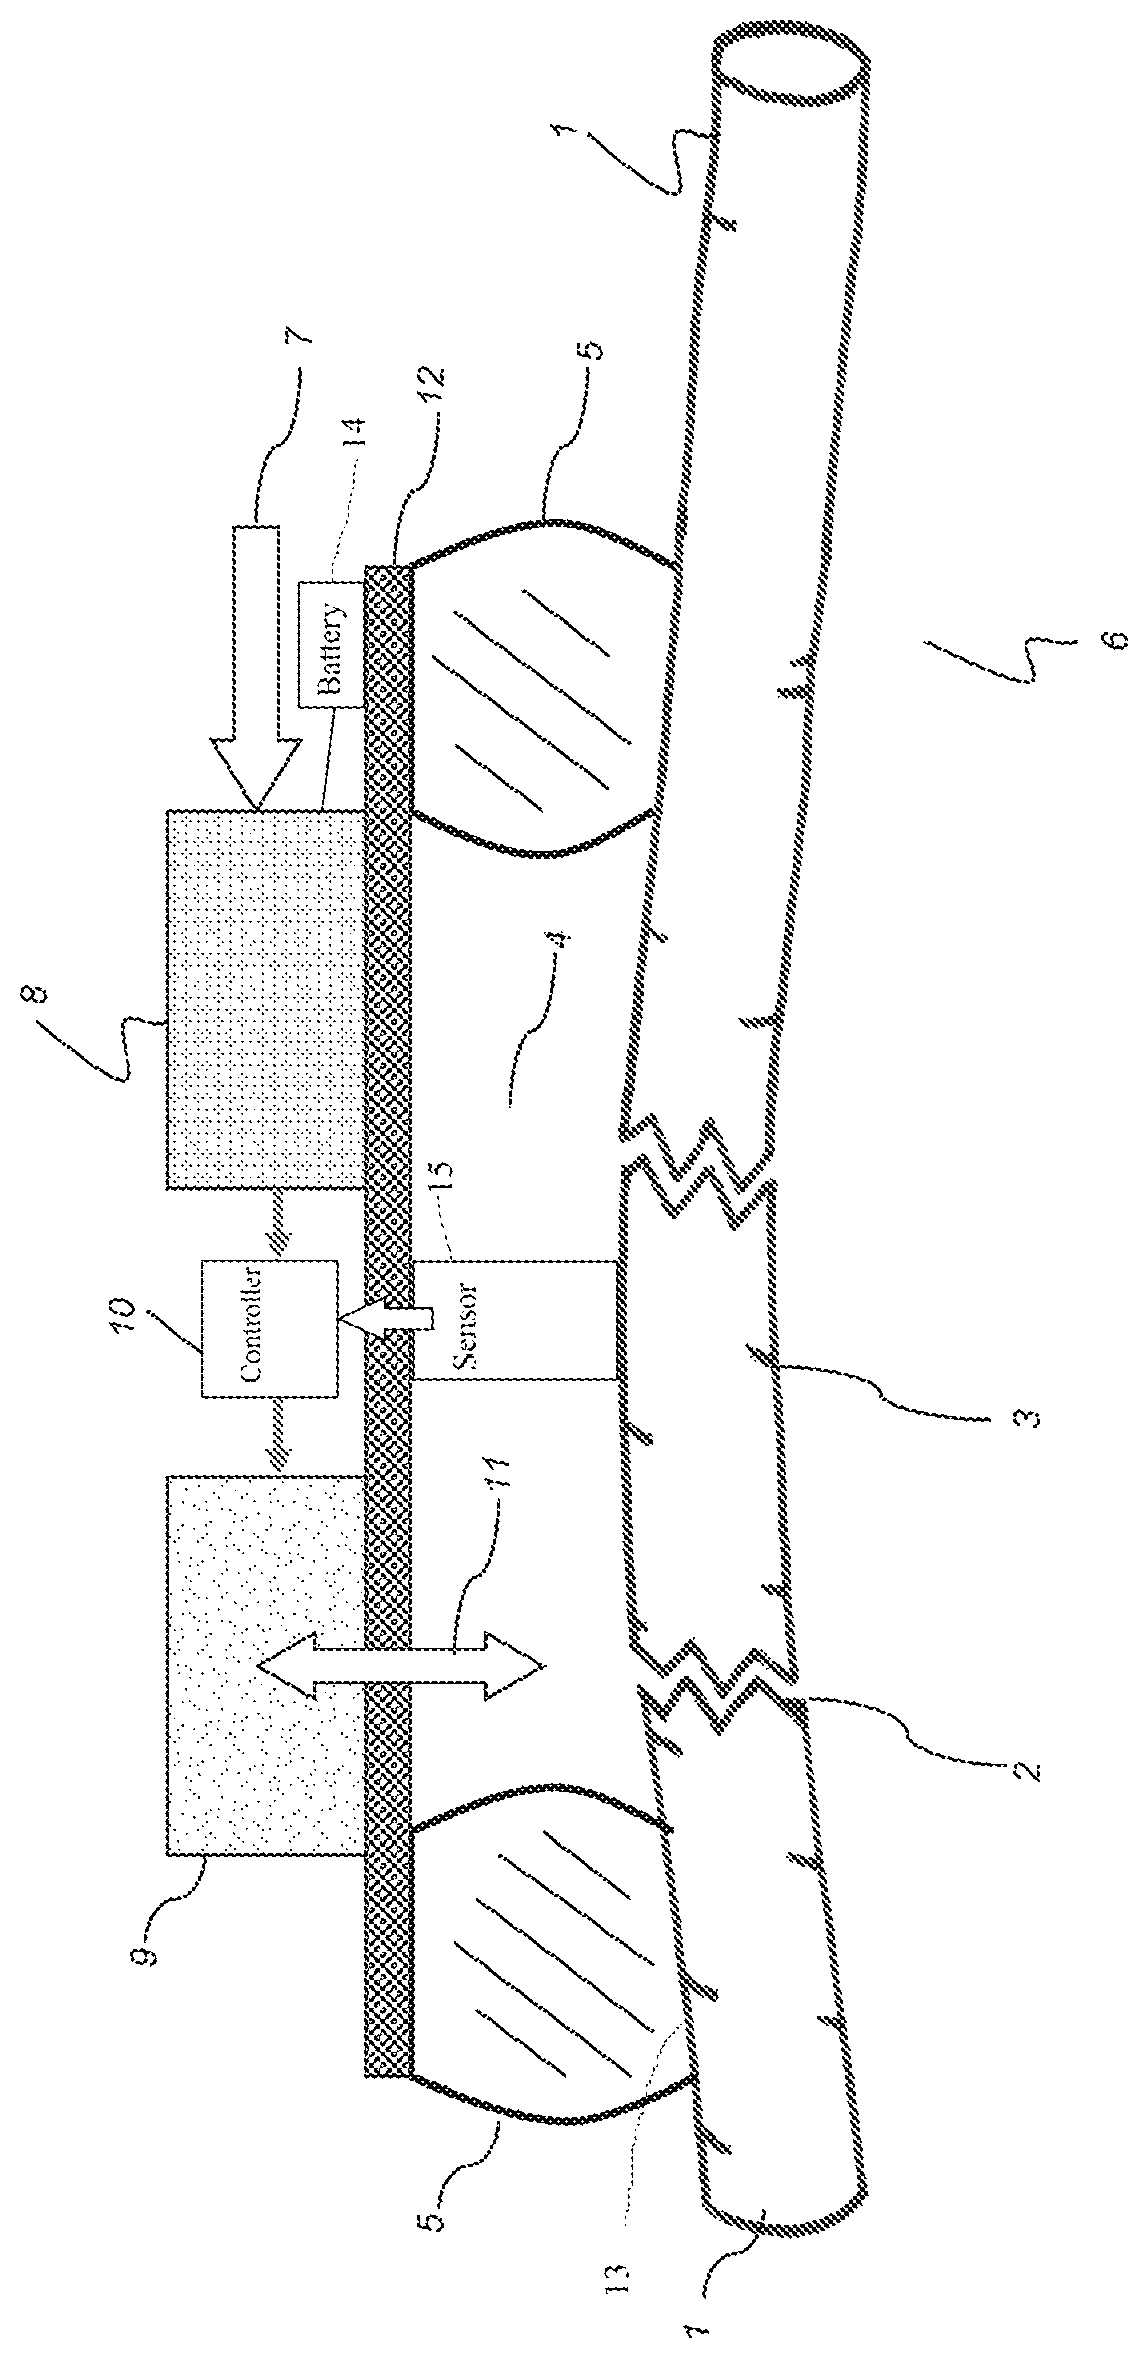 System for dynamically stabilizing the chest wall after injury, fracture, or operative procedures